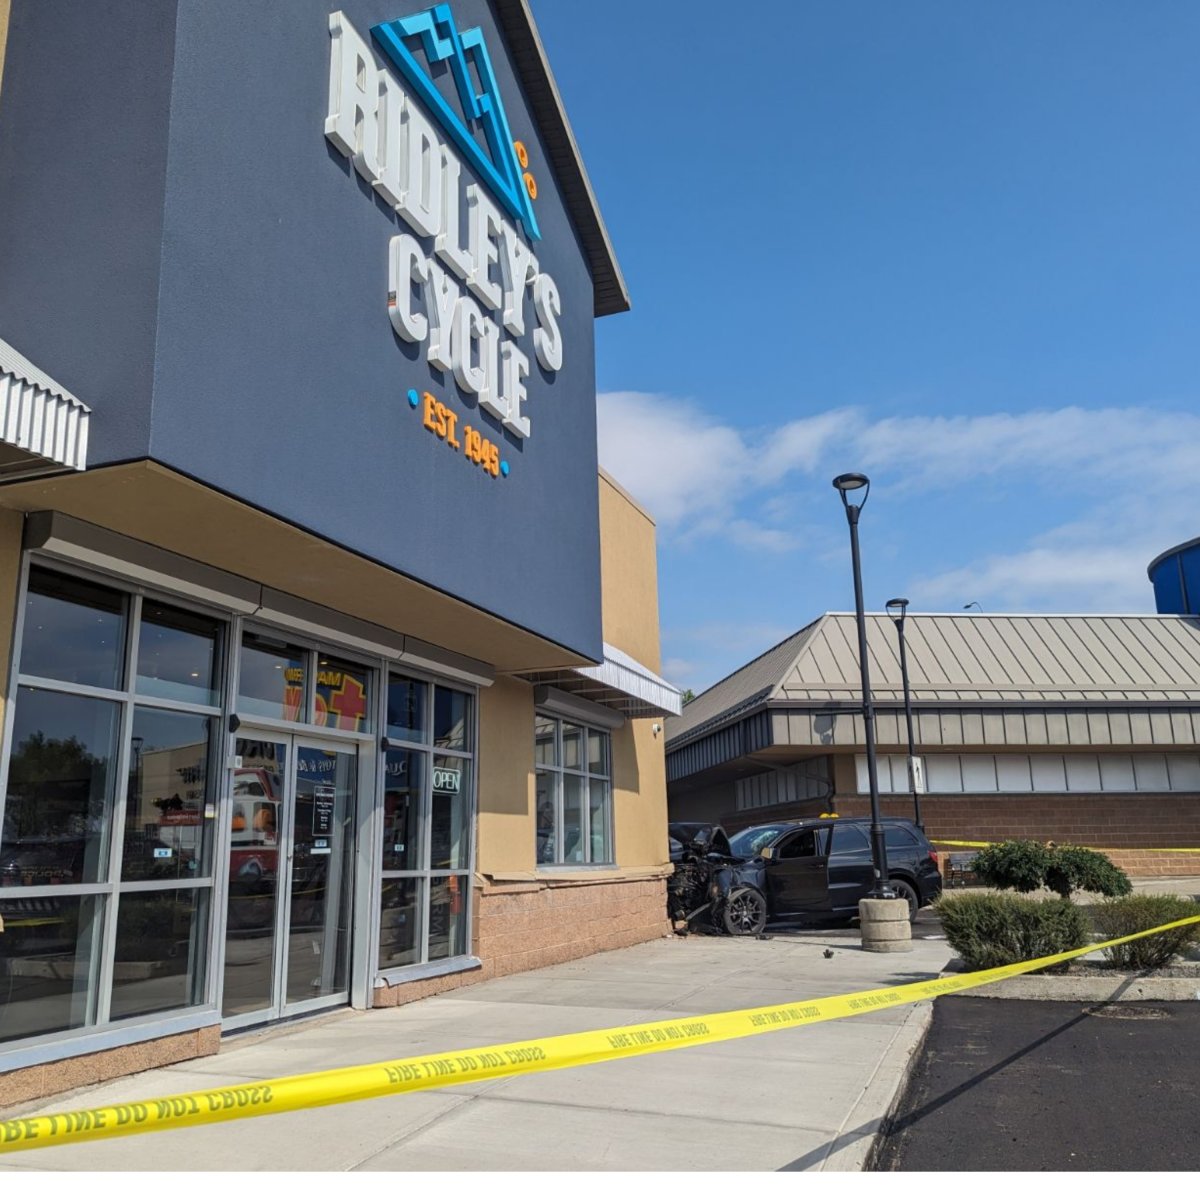 One person was taken to hospital after an SUV crashed into the exterior of the Ridley's Cycle location in the Westhills Towne Centre Tuesday morning.